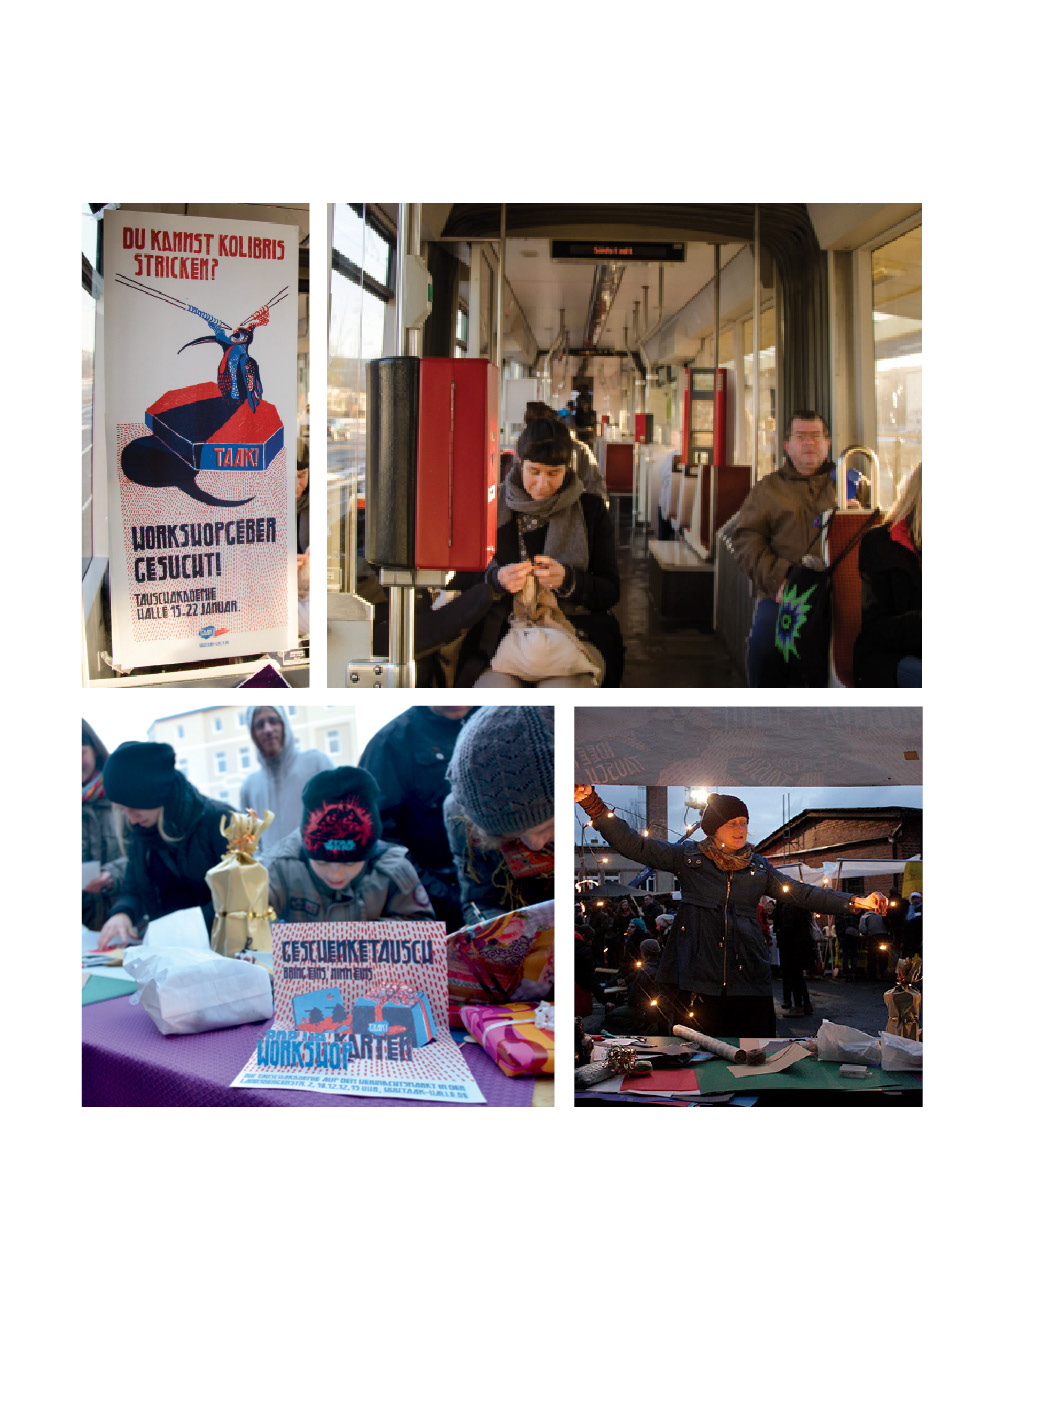 PROMOTING WORKSHOPS in a cable car and at The Christmas Market